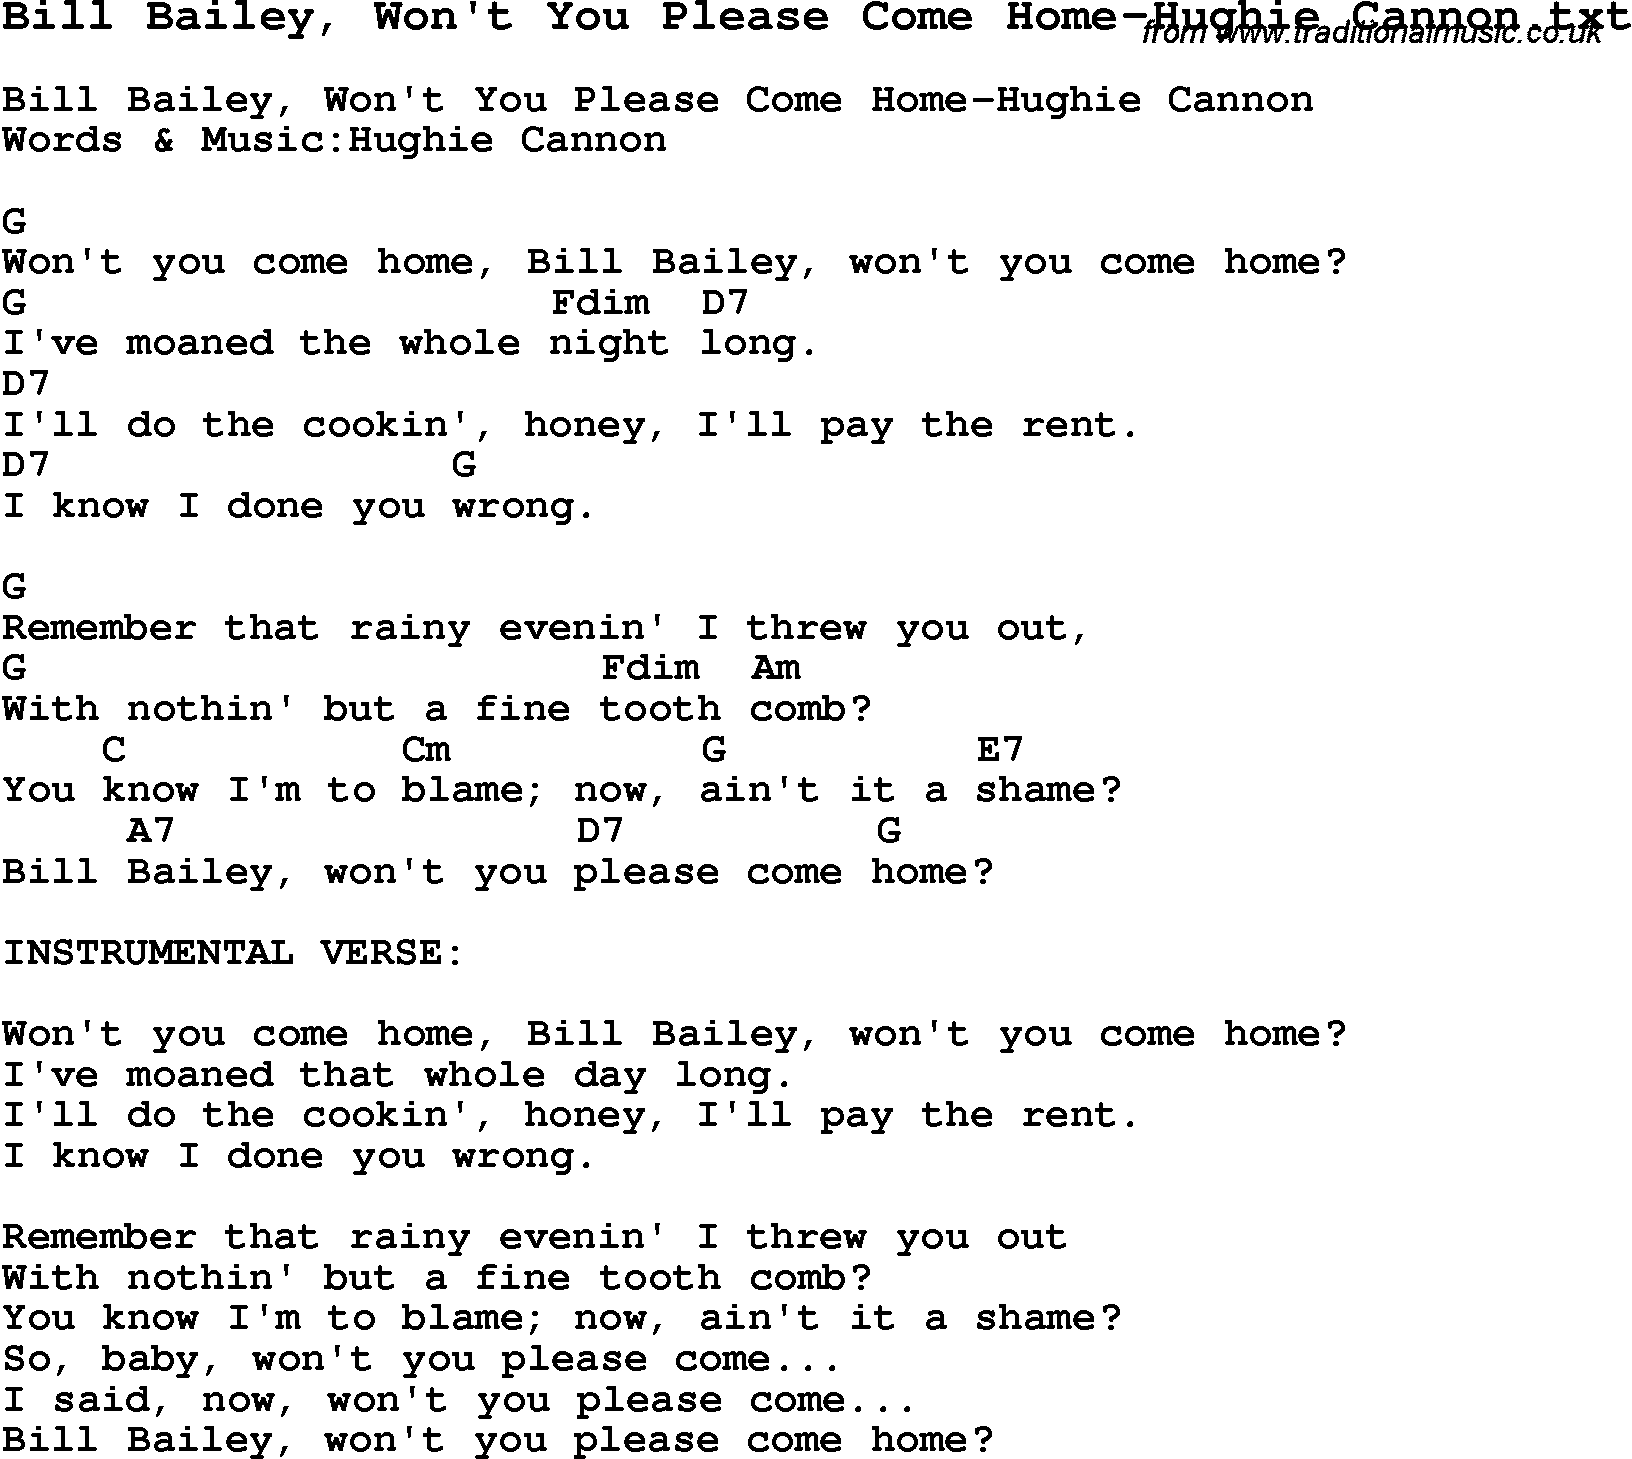 Jazz Song from top bands and vocal artists with chords, tabs and lyrics - Bill Bailey, Won't You Please Come Home-Hughie Cannon